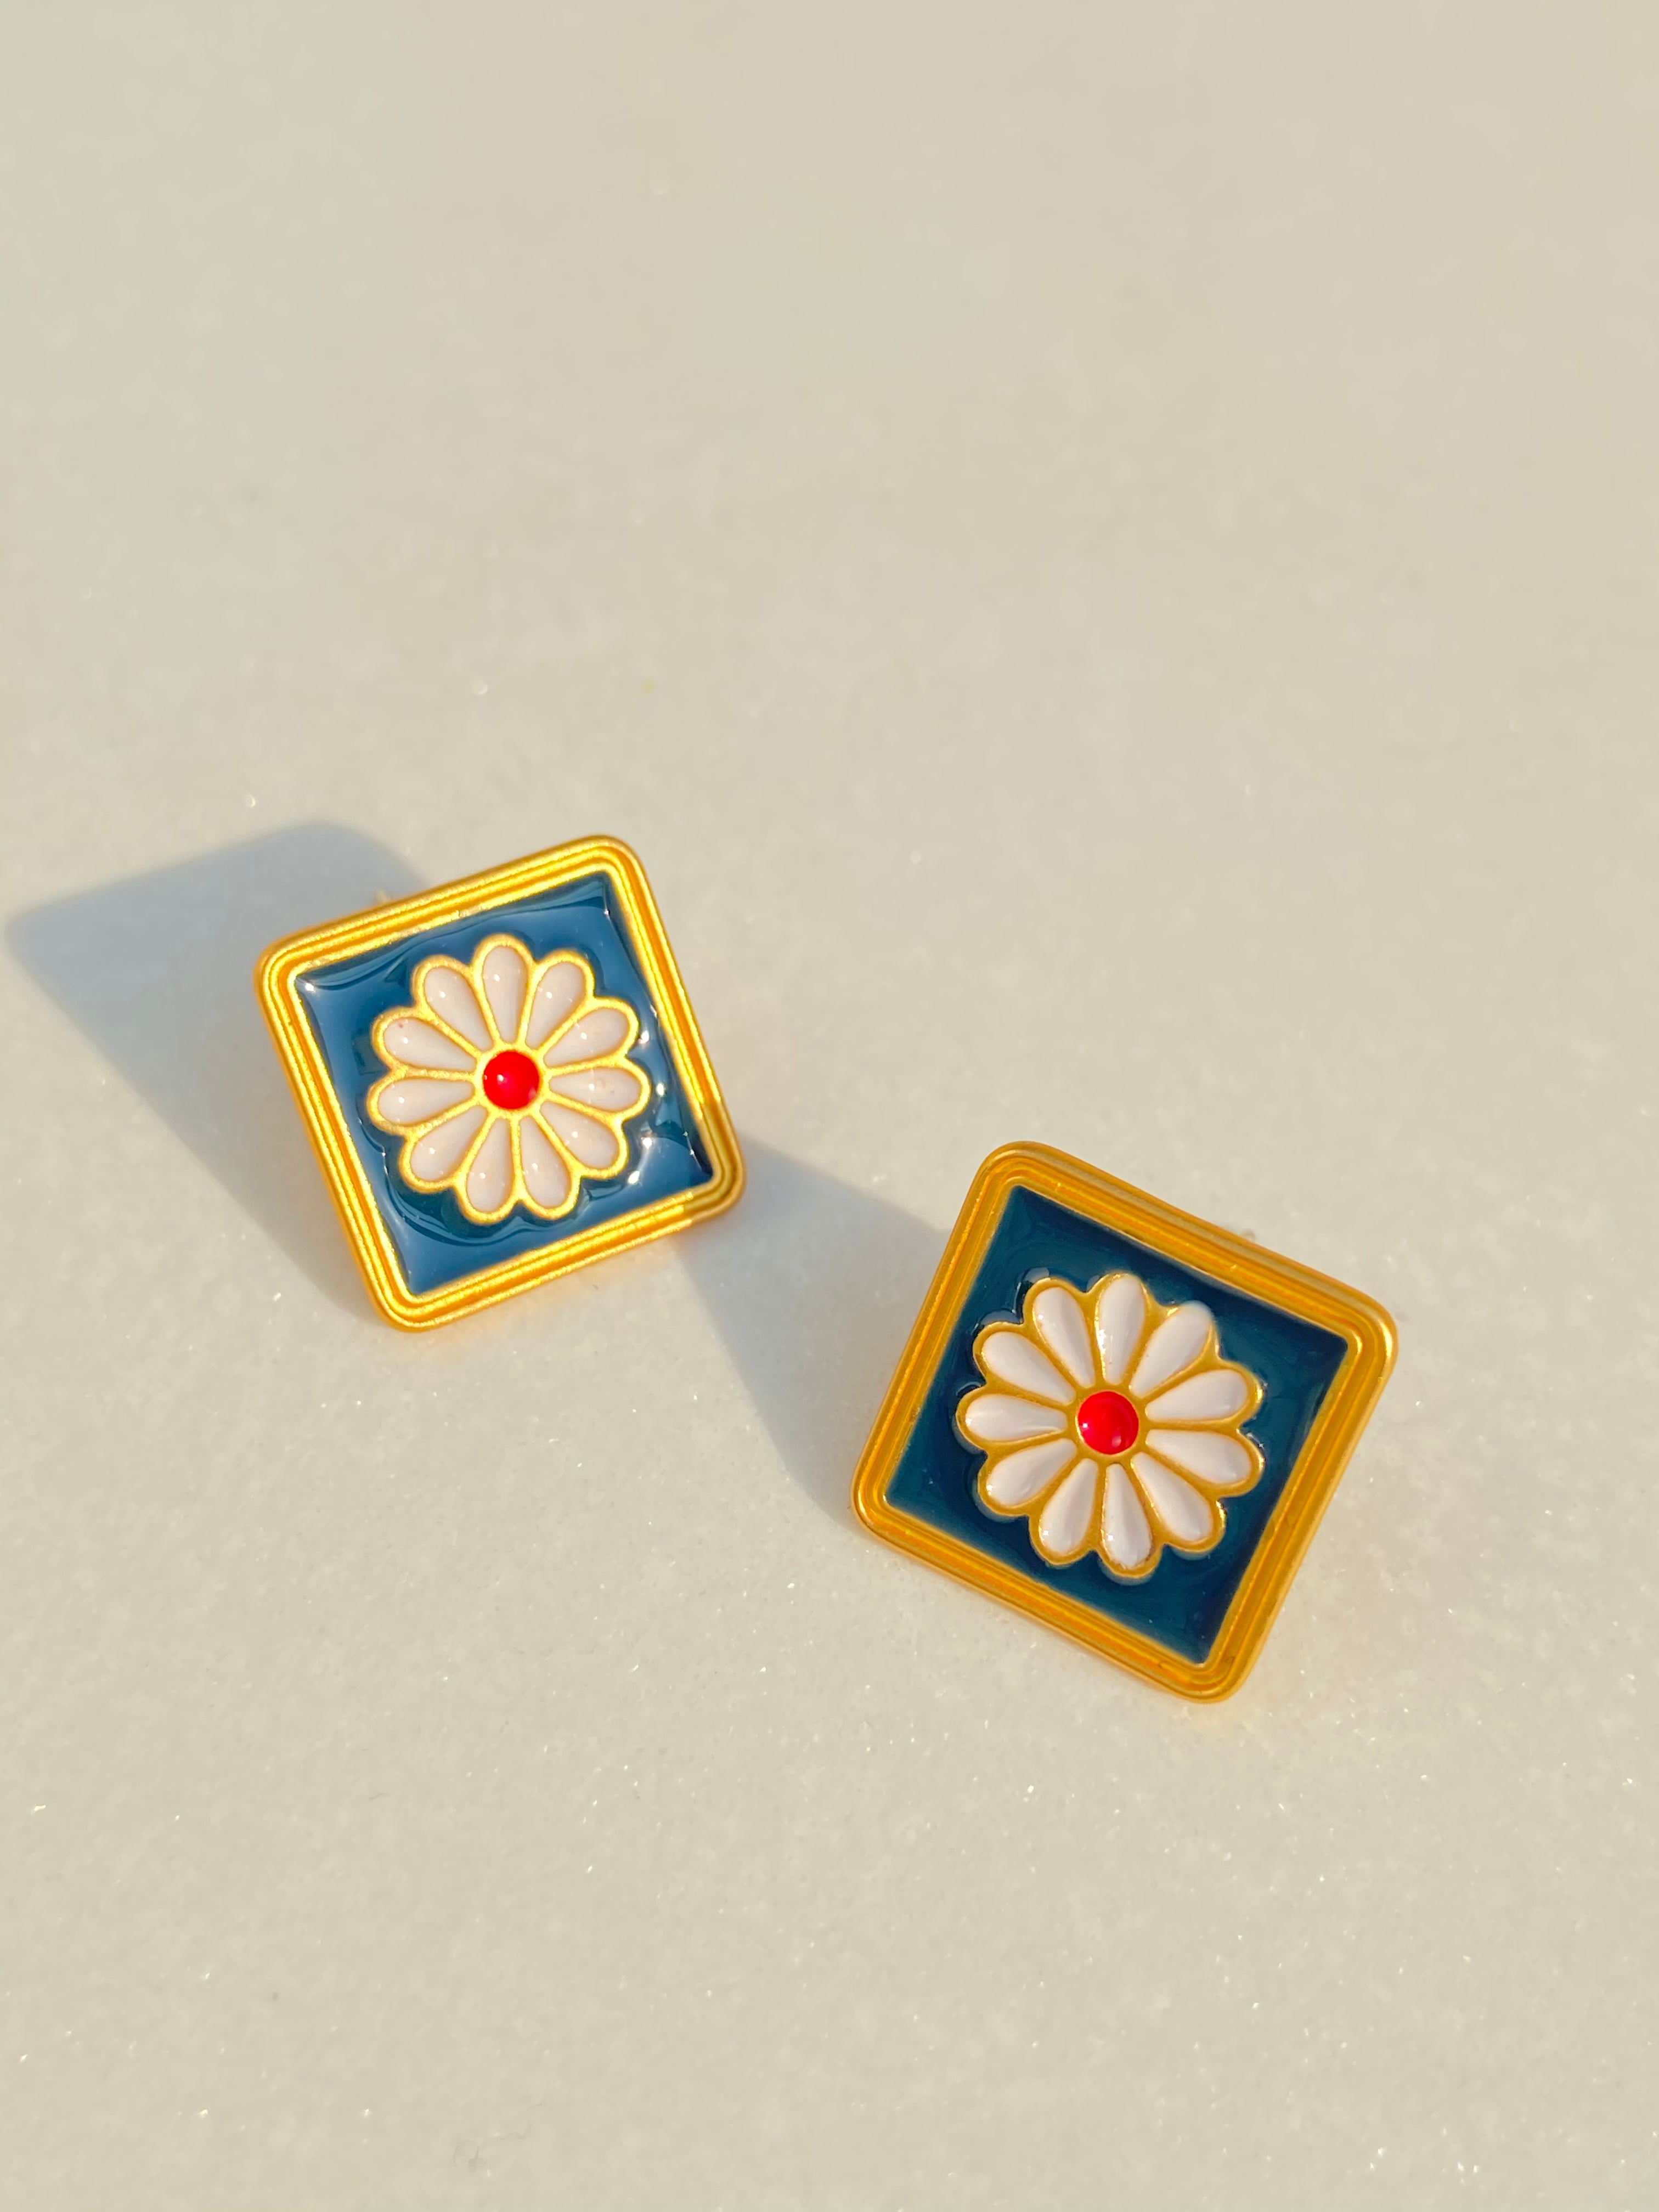 Vintage Square Daisy Earrings